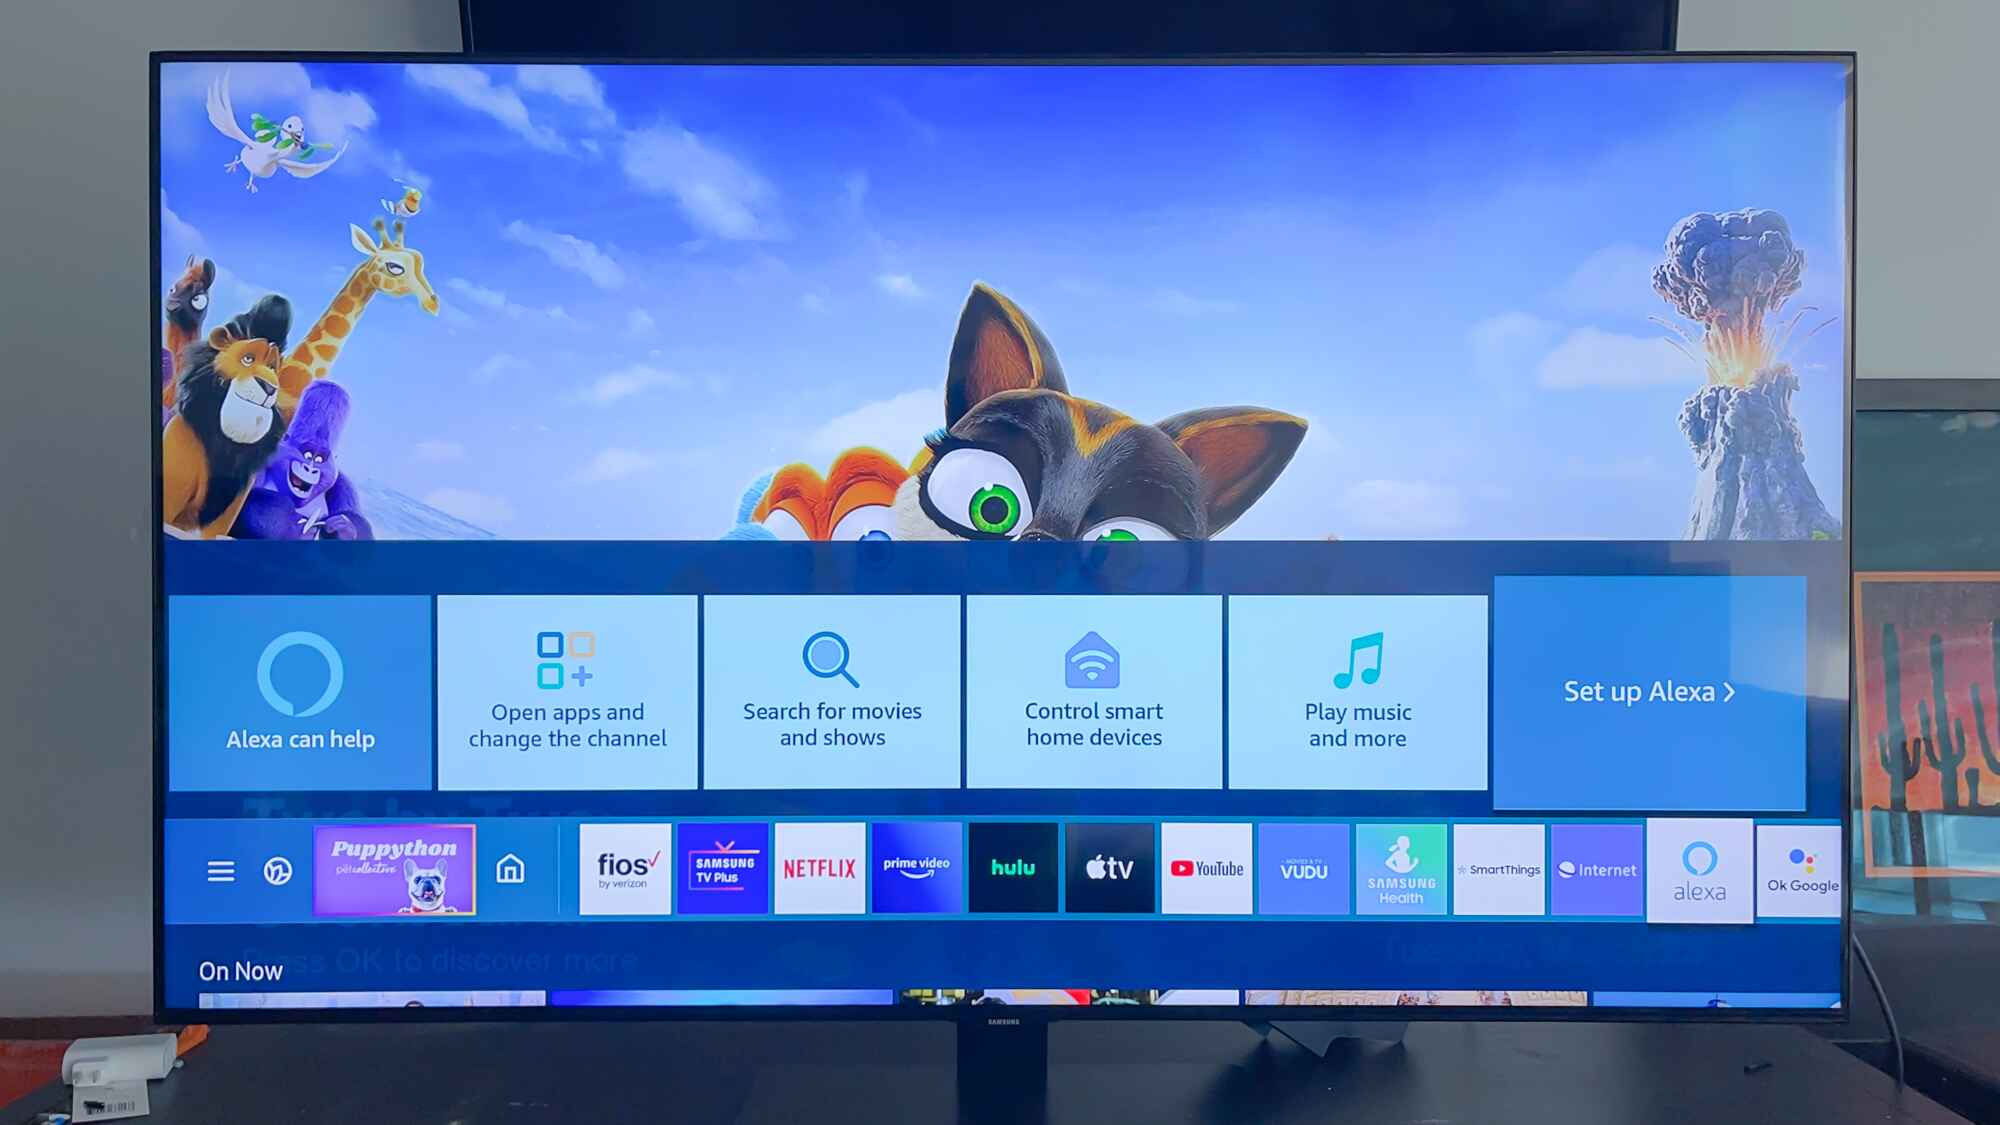 How To Connect Samsung Smart TV To Alexa